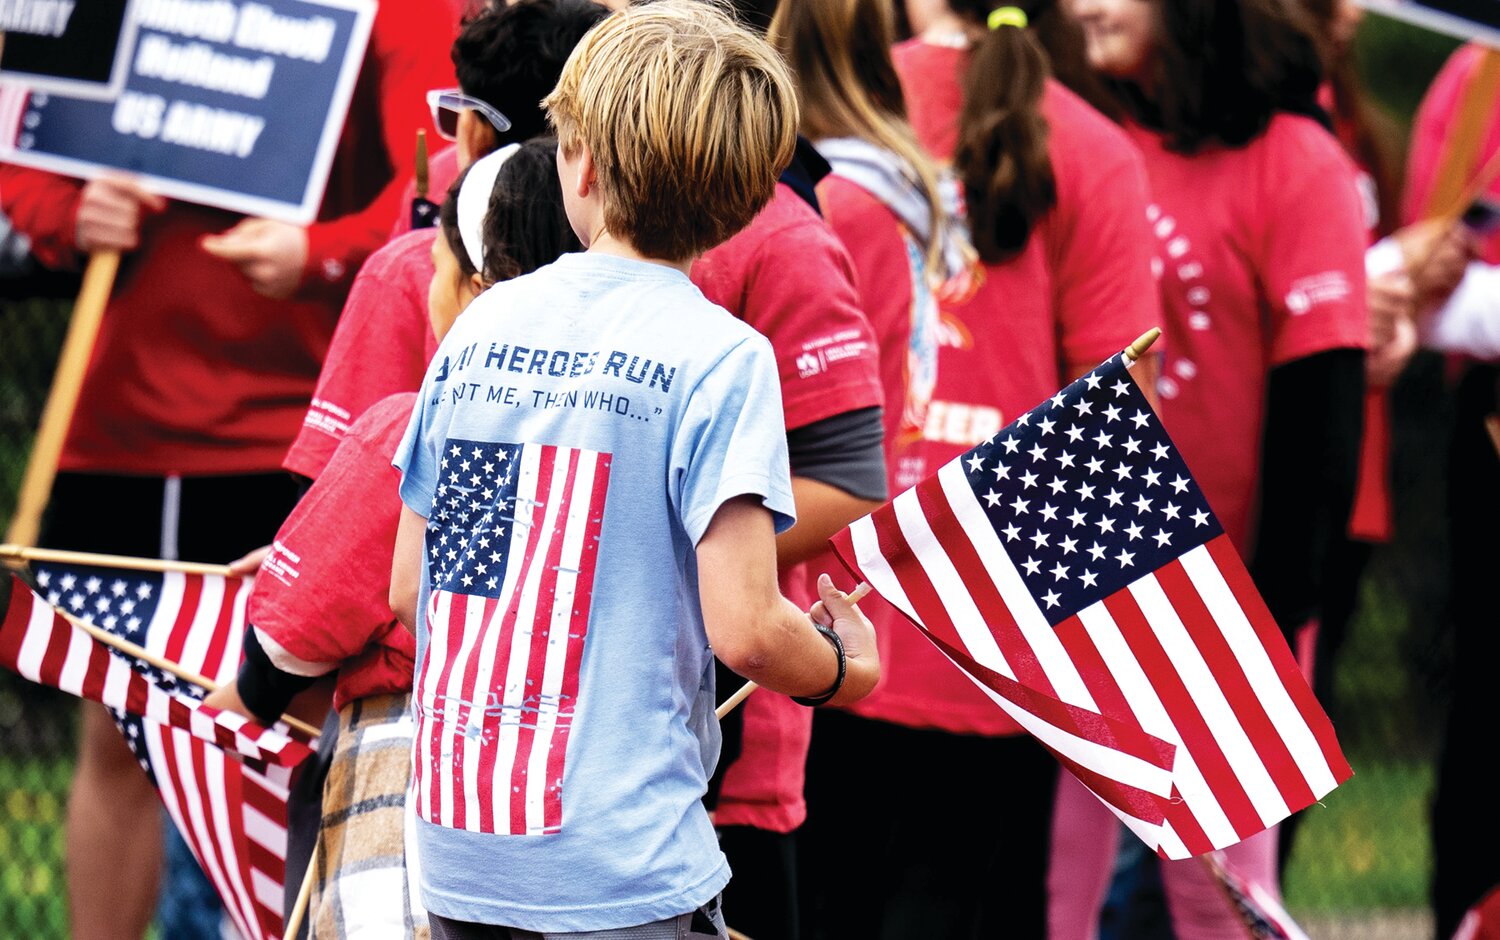 Young people prepare to cheer on participants in Sunday’s 9/11 Heroes Run at War Memorial Stadium in Doylestown.